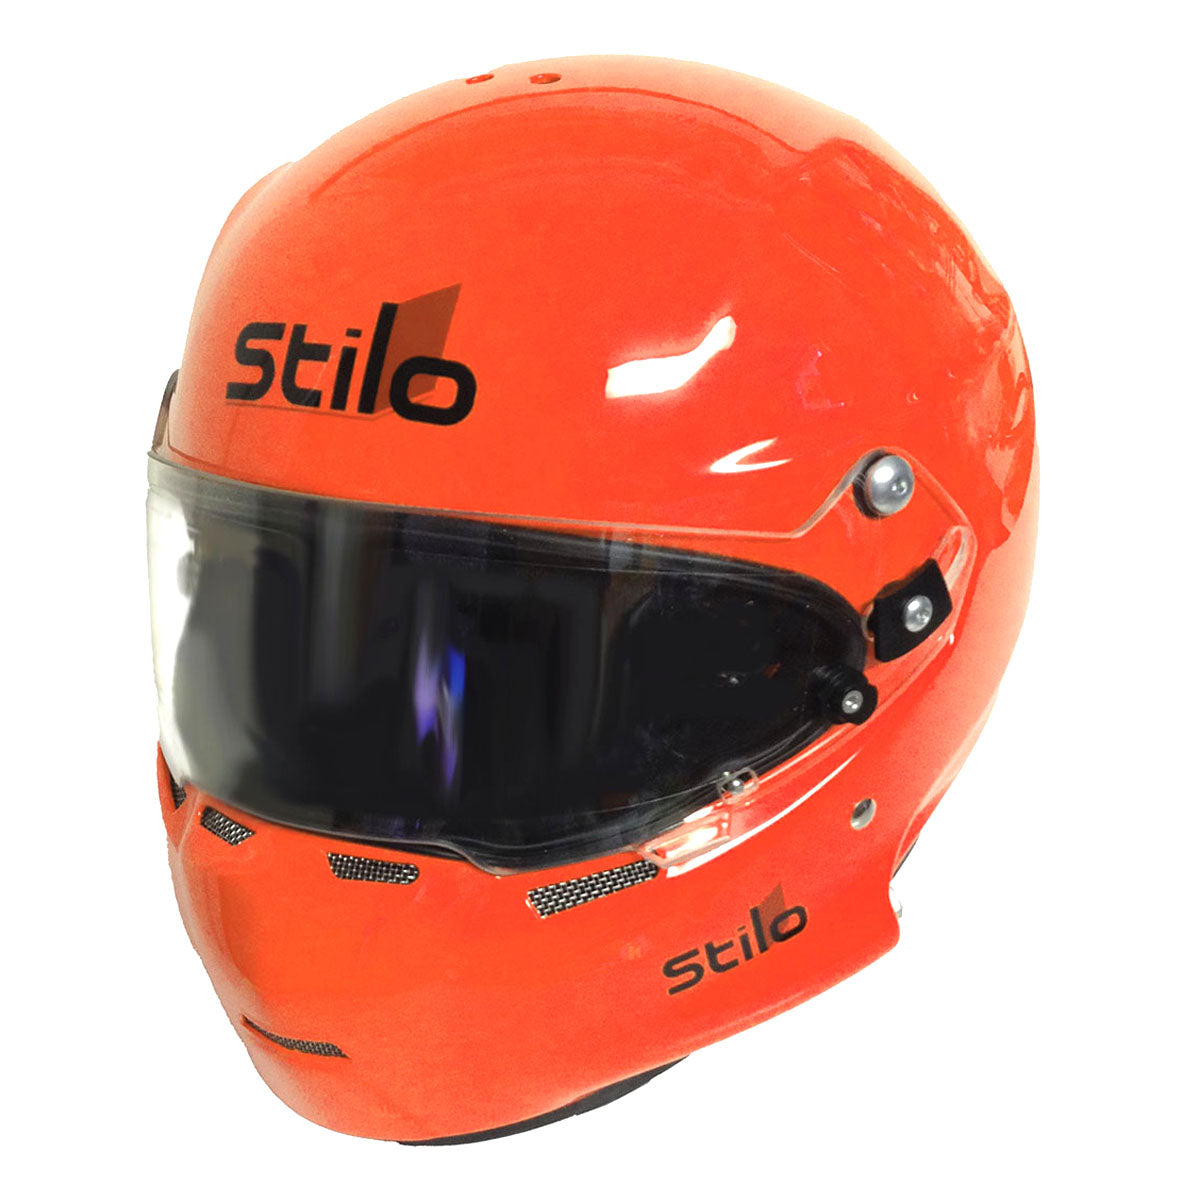 "Upgrade Your Racing Gear with the Stilo ST5.1 GT Offshore Helmet - Unrivaled Performance"